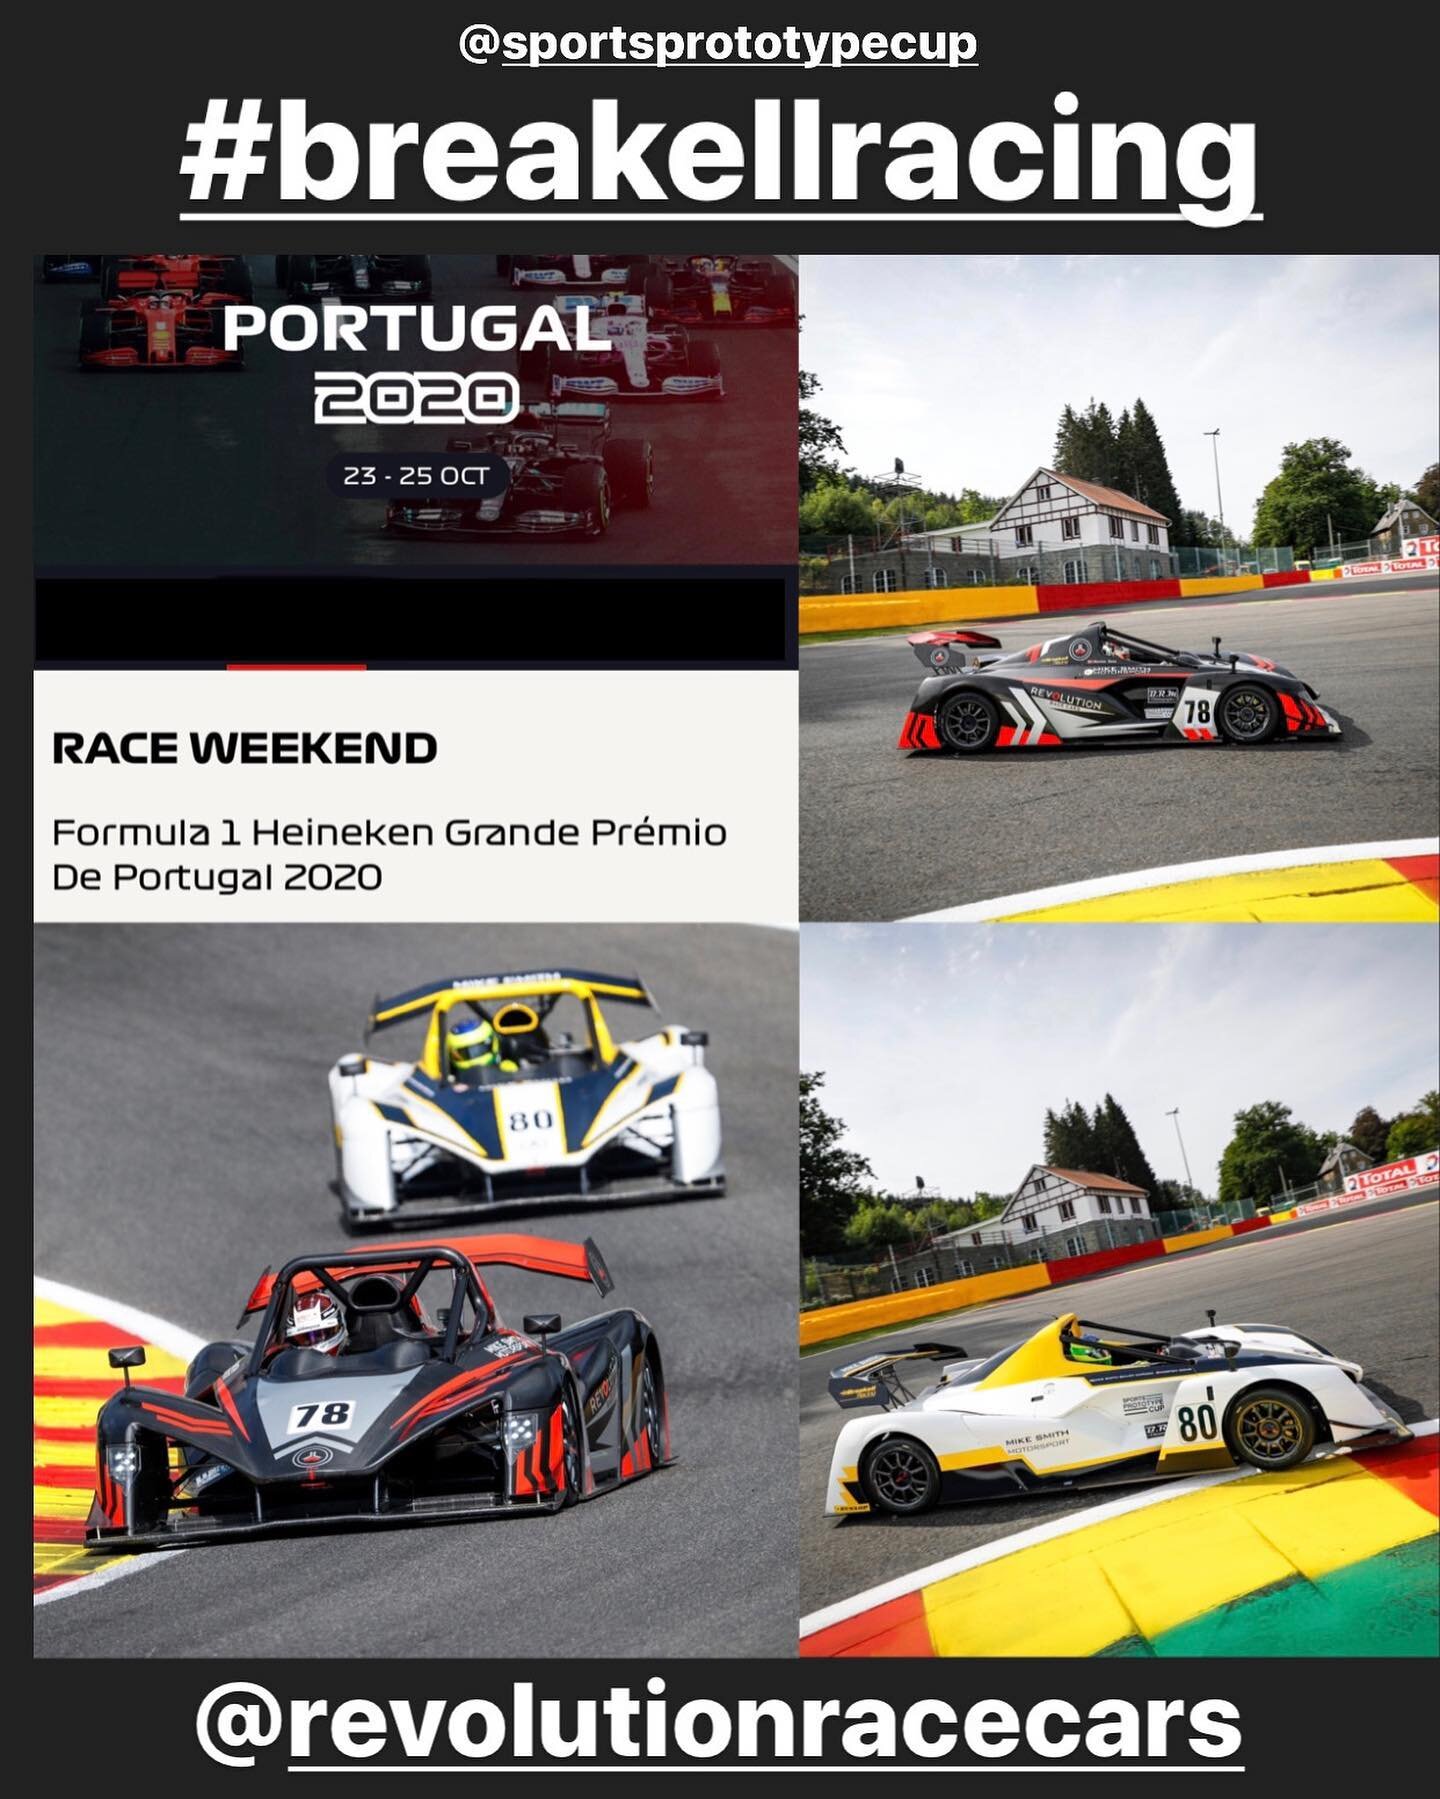 Preparations are well underway for us to compete in the @revolutionracecars F1 GP support race @autodromodoalgarve in October.
We are so excited to be competing at this event this year. @sportsprototypecup @f1 @portugalf1 #breakelkracing